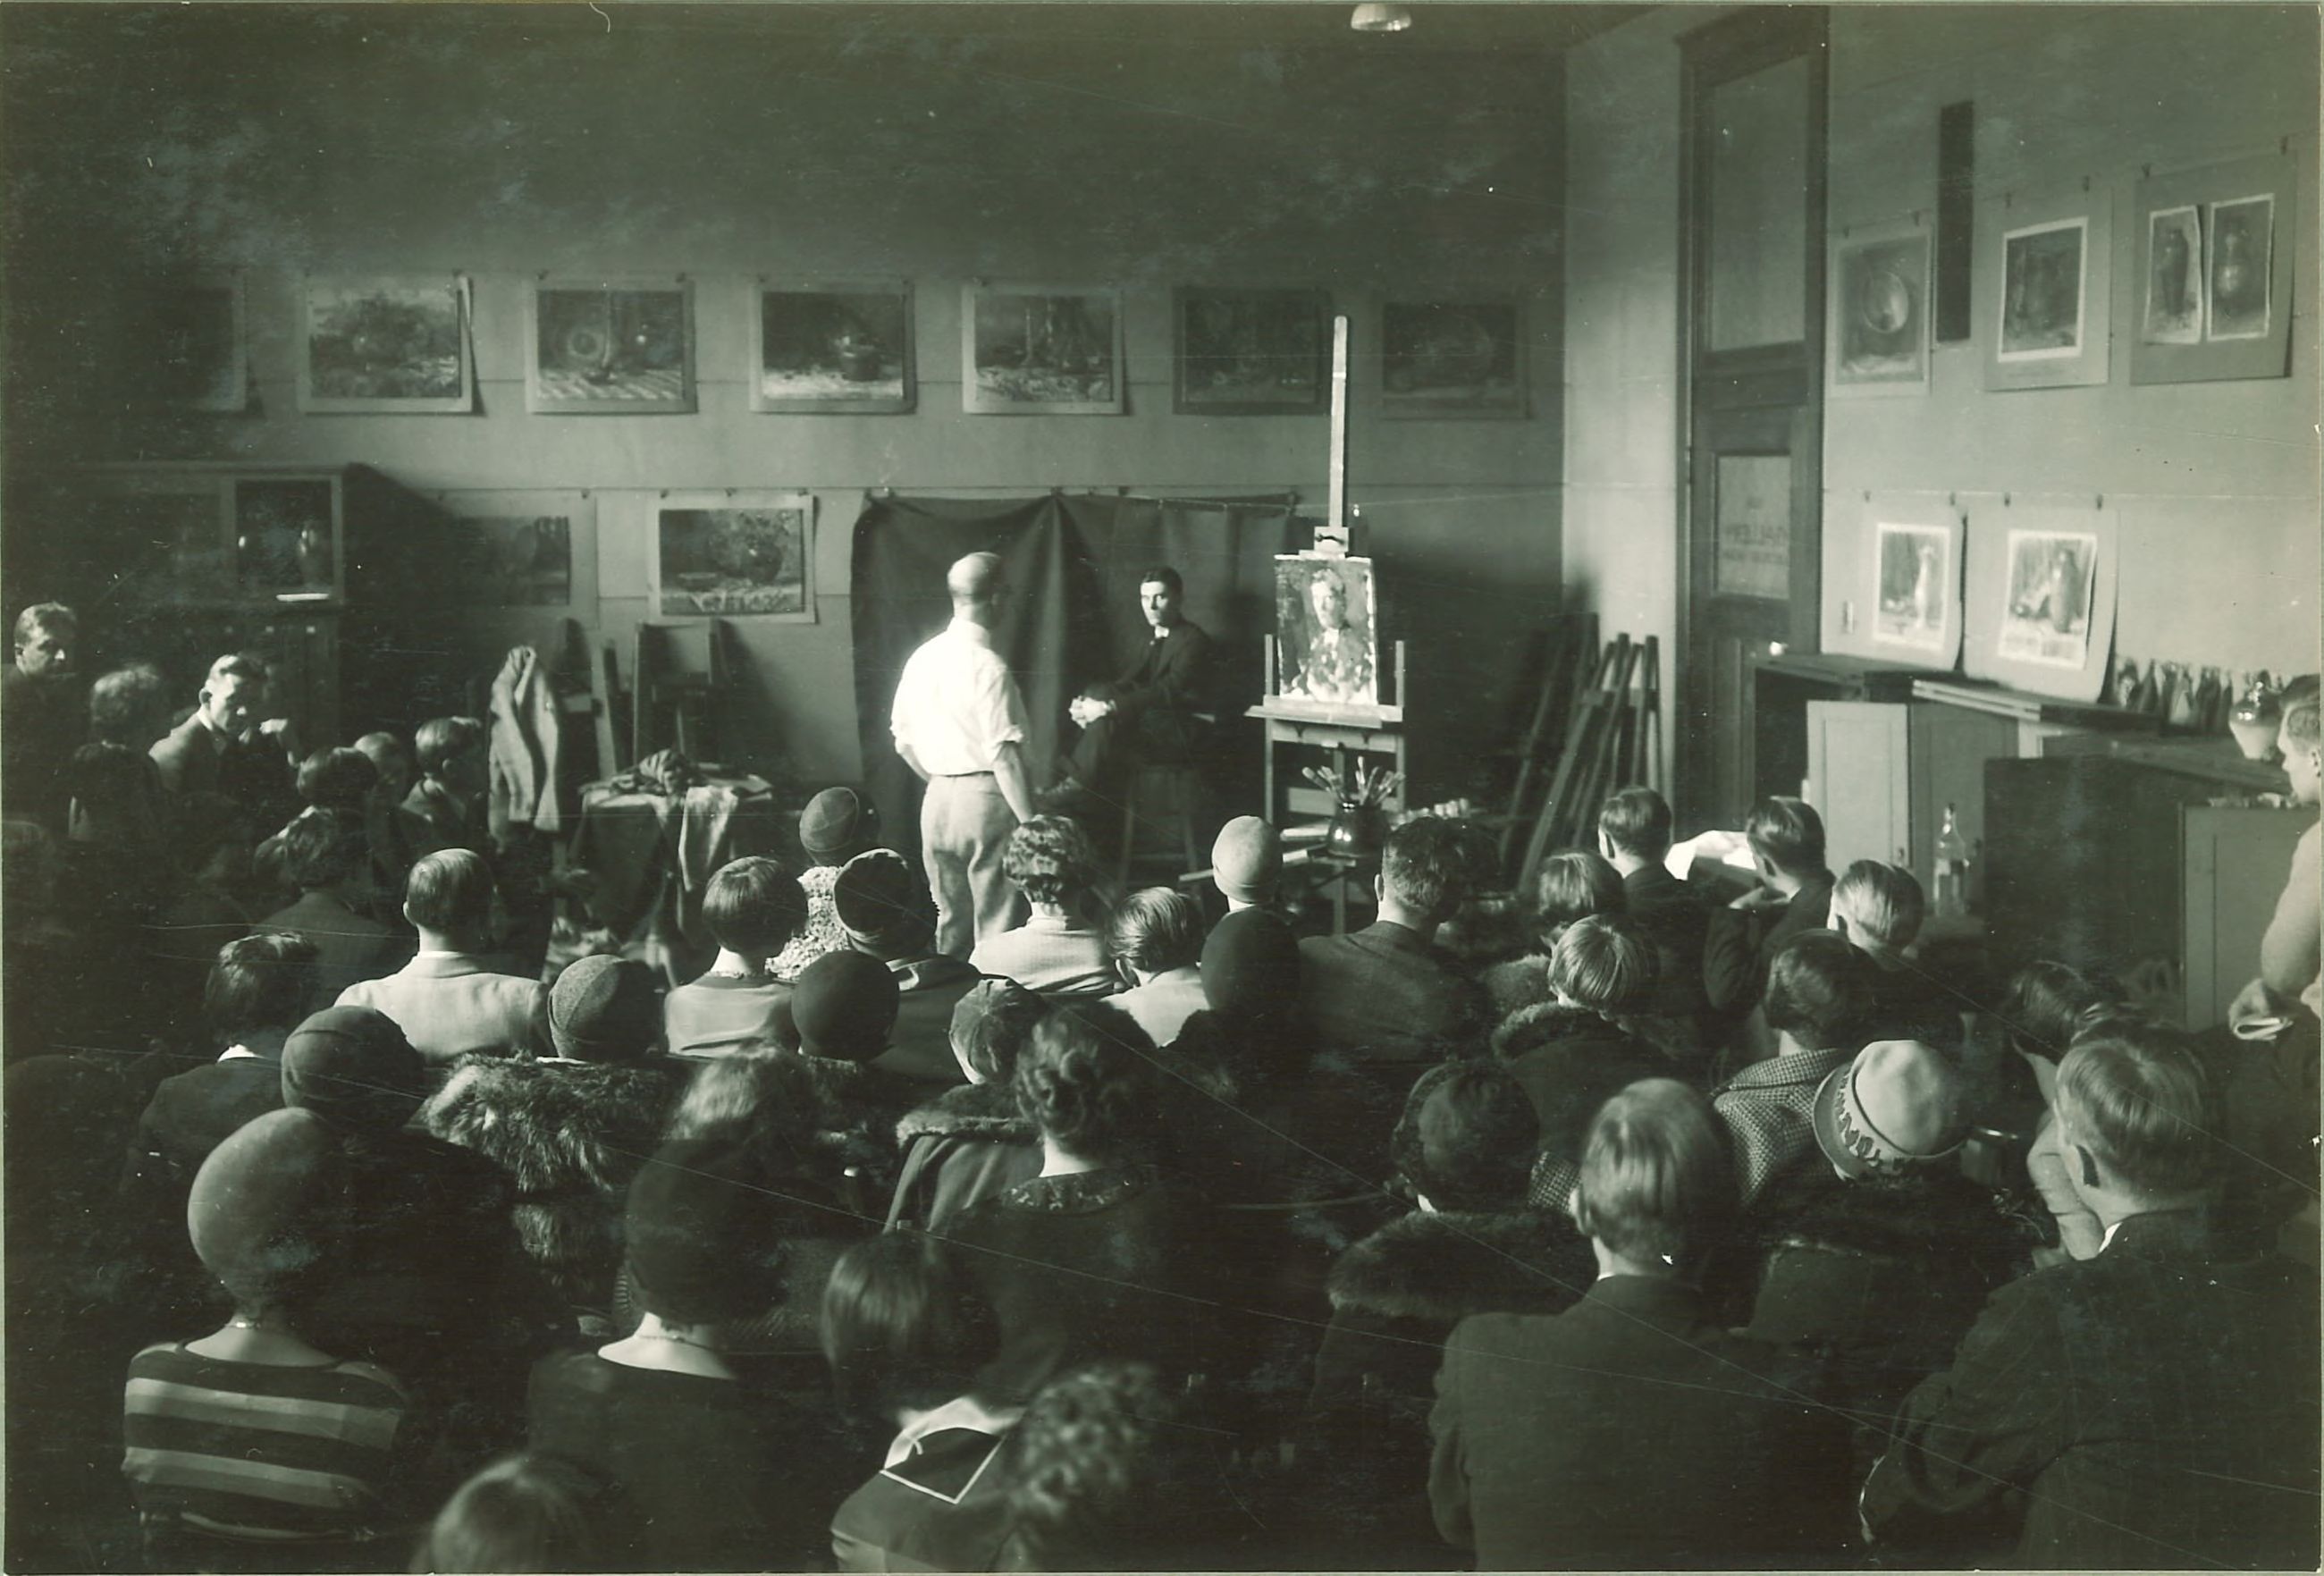 A photograph of a full classroom watching a man paint a portrait of a live model at the University of Iowa.